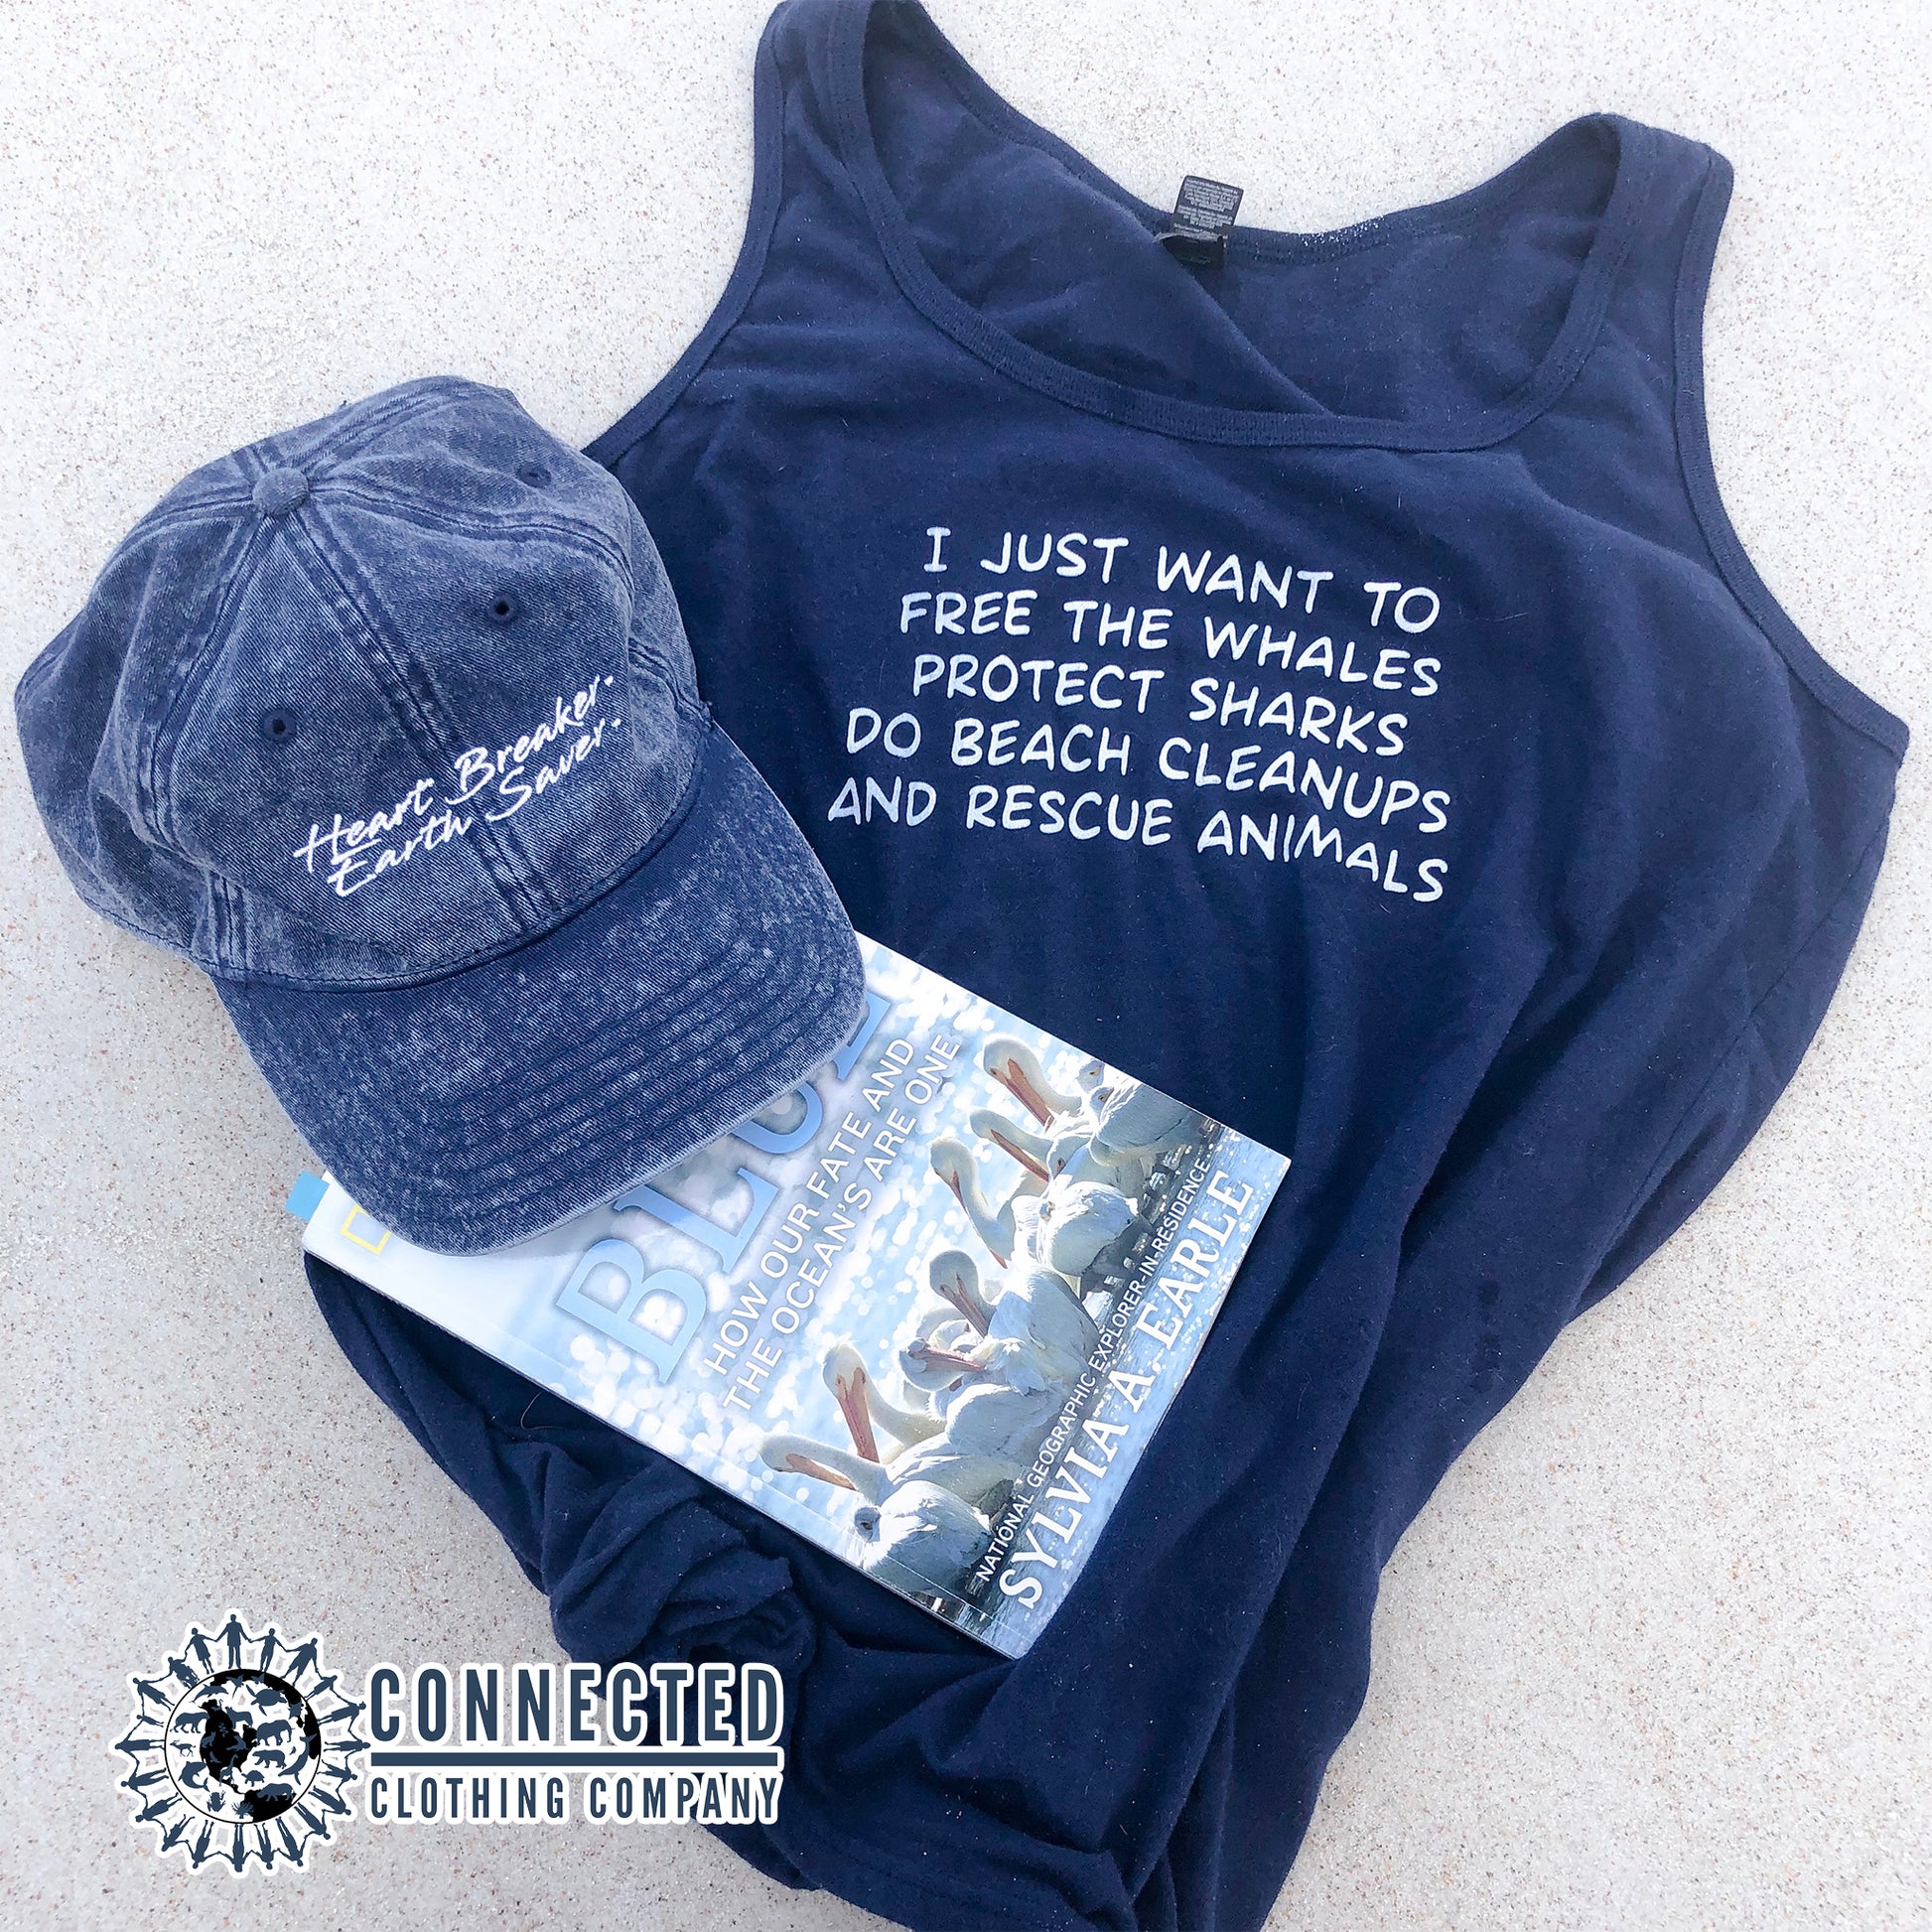 Navy Blue I Just Want To Save The World Women's Relaxed Tank Top on the beach sand with Heart Breaker Earth Saver Cotton Cap and Mission Blue book. - Connected Clothing Company - Ethically and Sustainably Made - 10% donated to Mission Blue ocean conservation